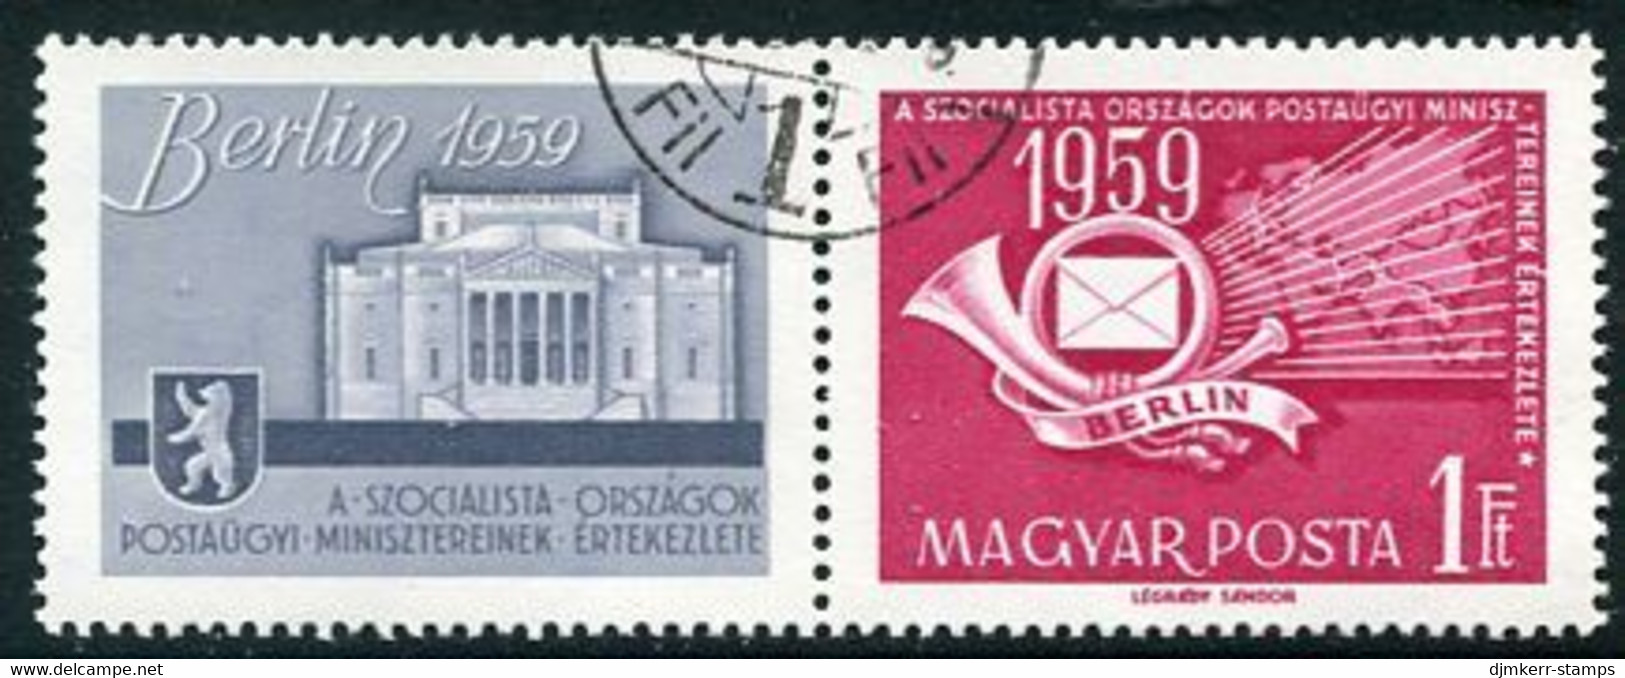 HUNGARY 1959 Socialist Minister's Postal Conference   Used.  Michel 1592 - Oblitérés